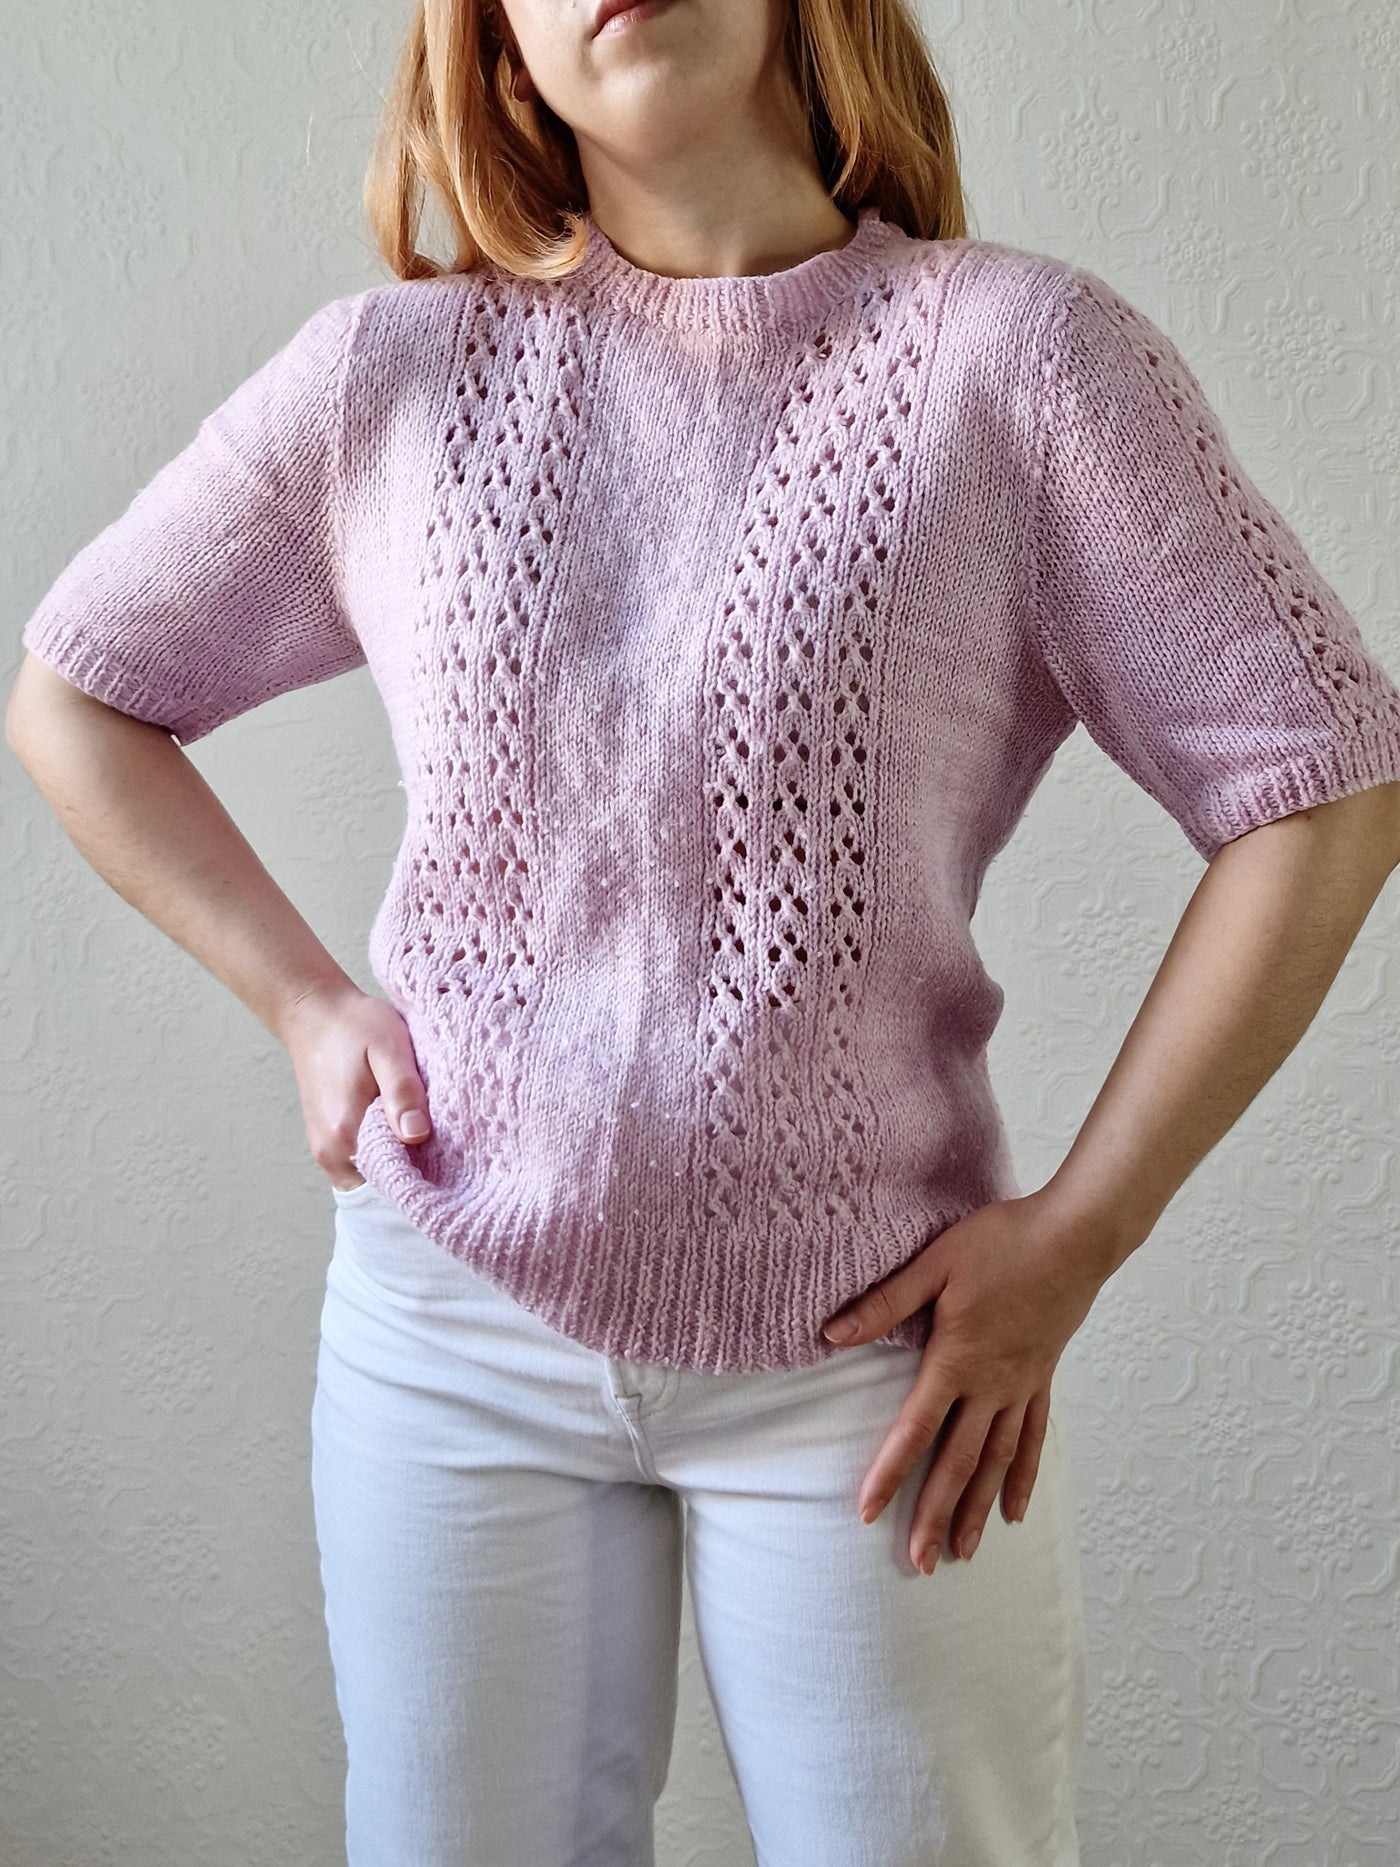 Vintage 80s Handknitted Lilac Purple Crew Neck Jumper with Half Sleeves - S